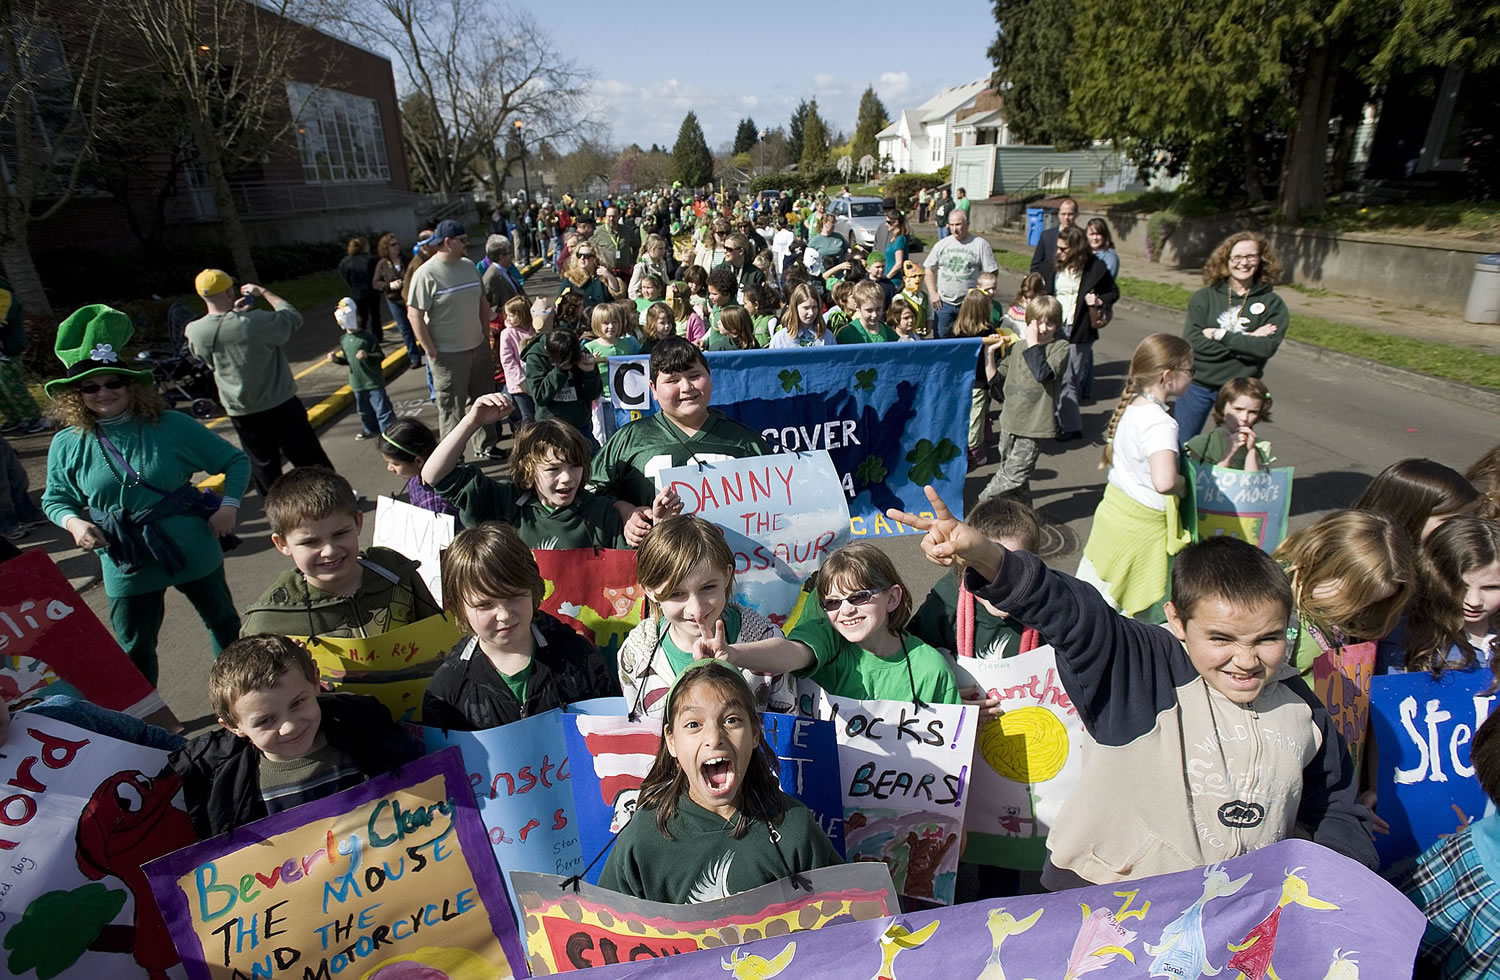 The Annual Paddy Hough Parade is a local St. Patrick's Day tradition. It begins at 12:30 p.m.